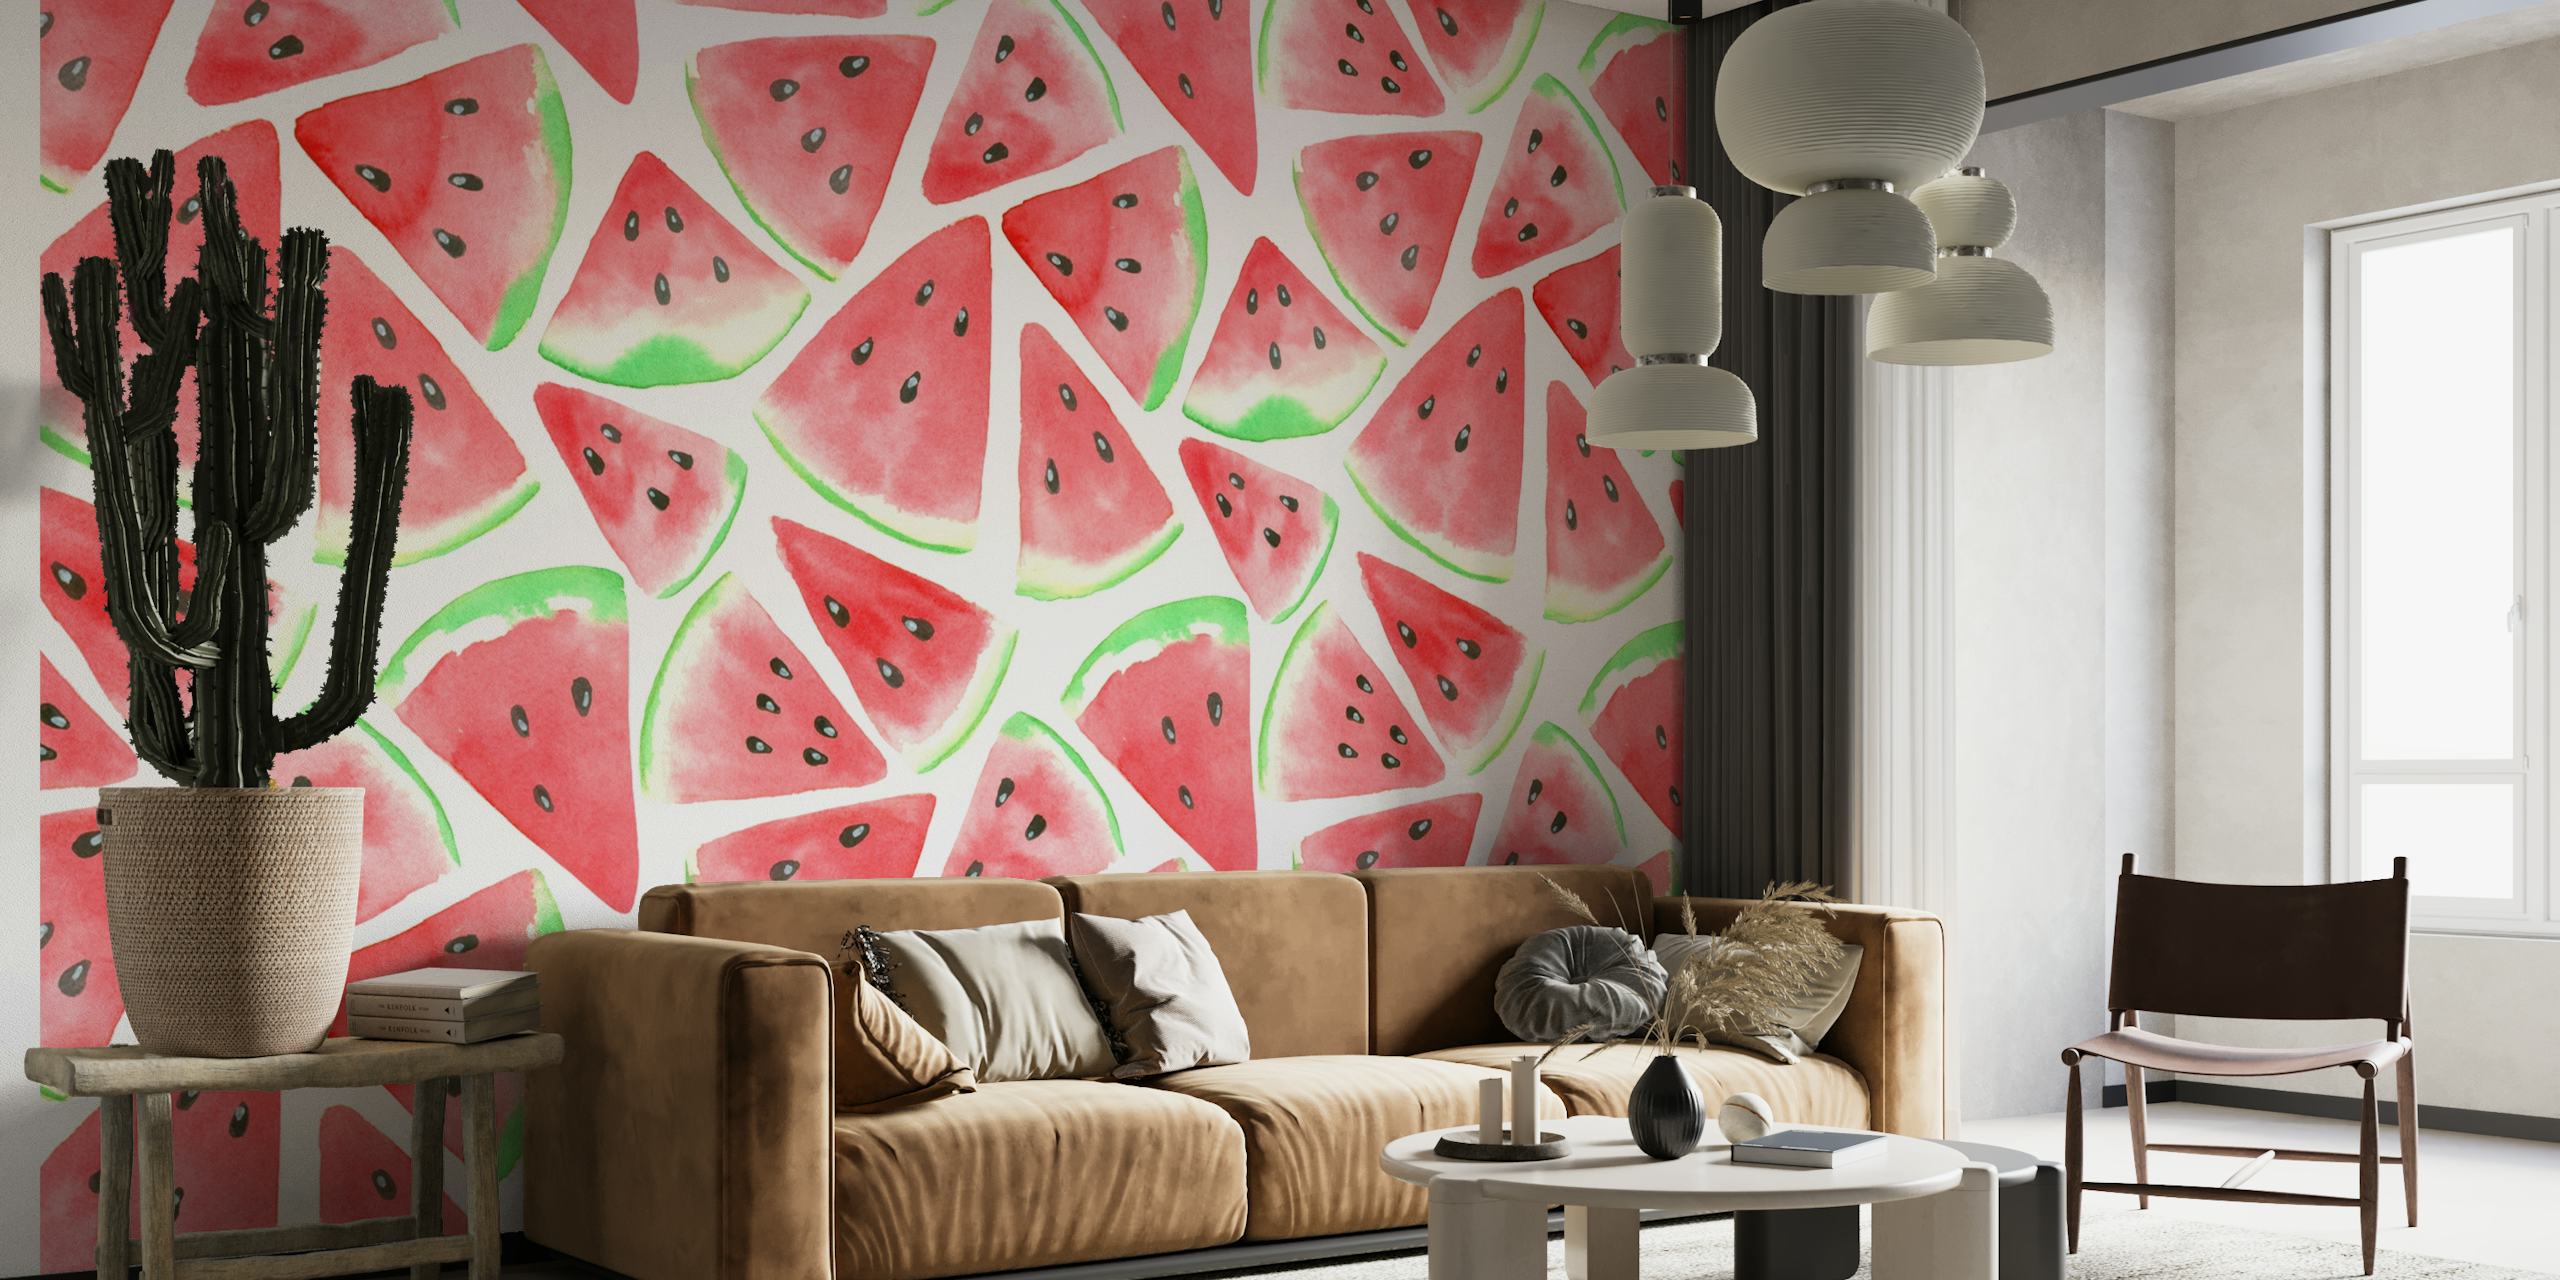 Watermelon slices 2 behang